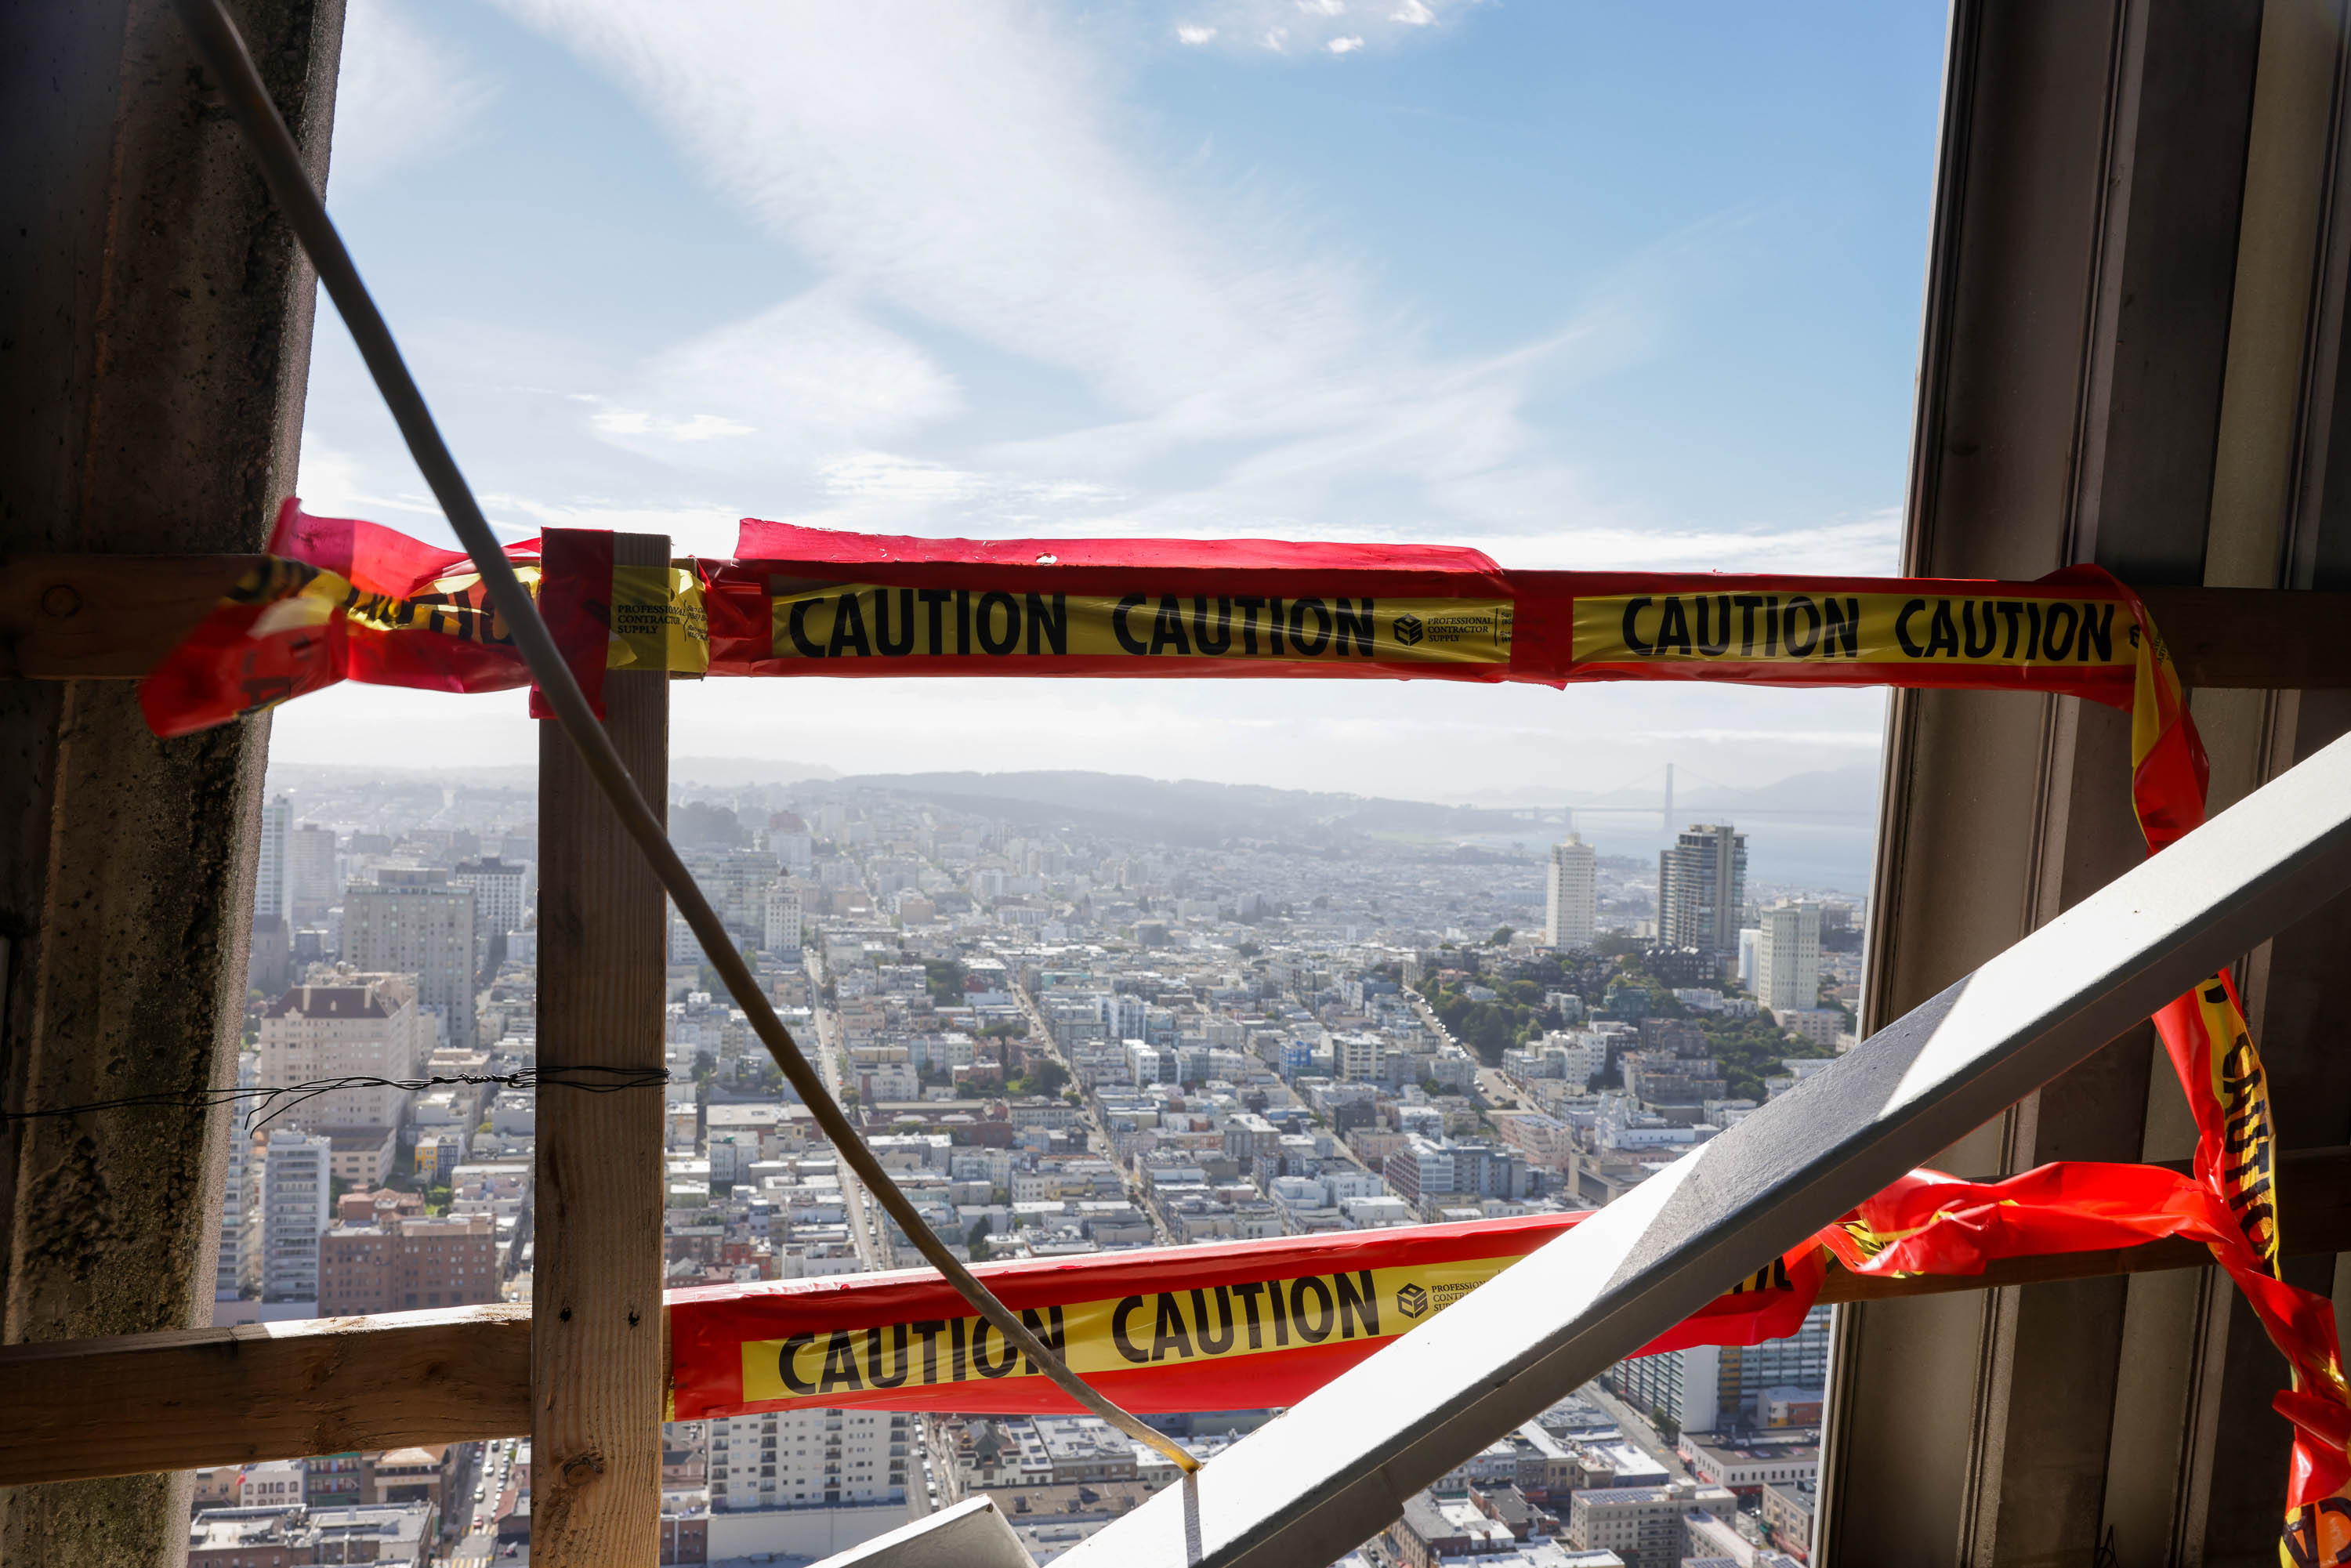 A cityscape viewed through a window with &quot;CAUTION&quot; tape across the foreground.